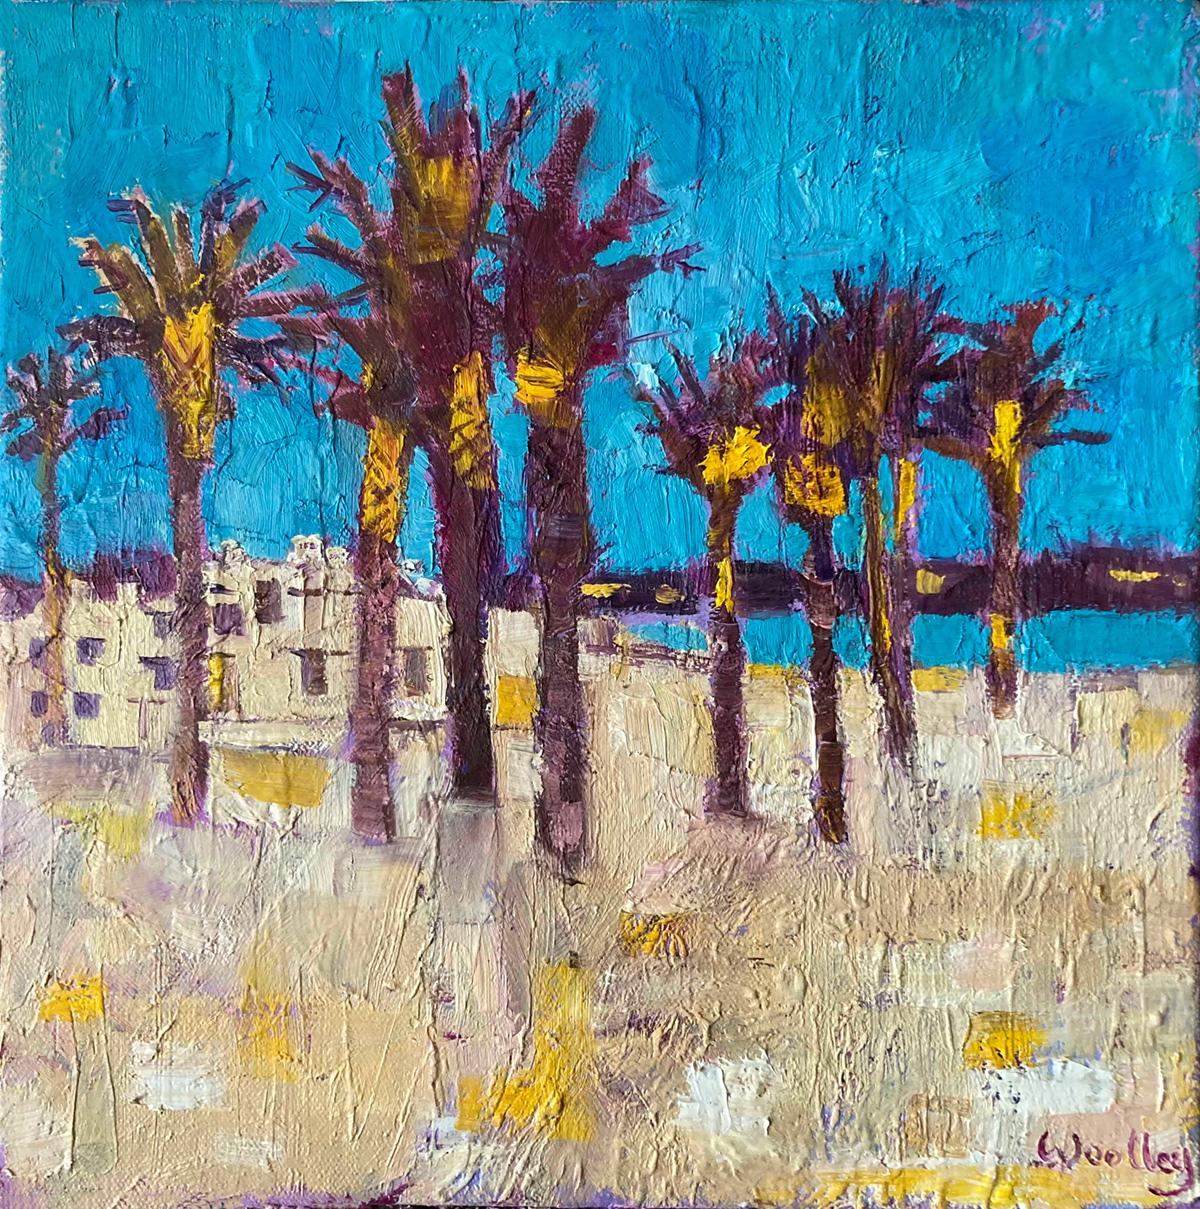 Eleanor Woolley Abstract Painting - Beach Palms La Cala with Oil Paint on Canvas, Painting Mid century